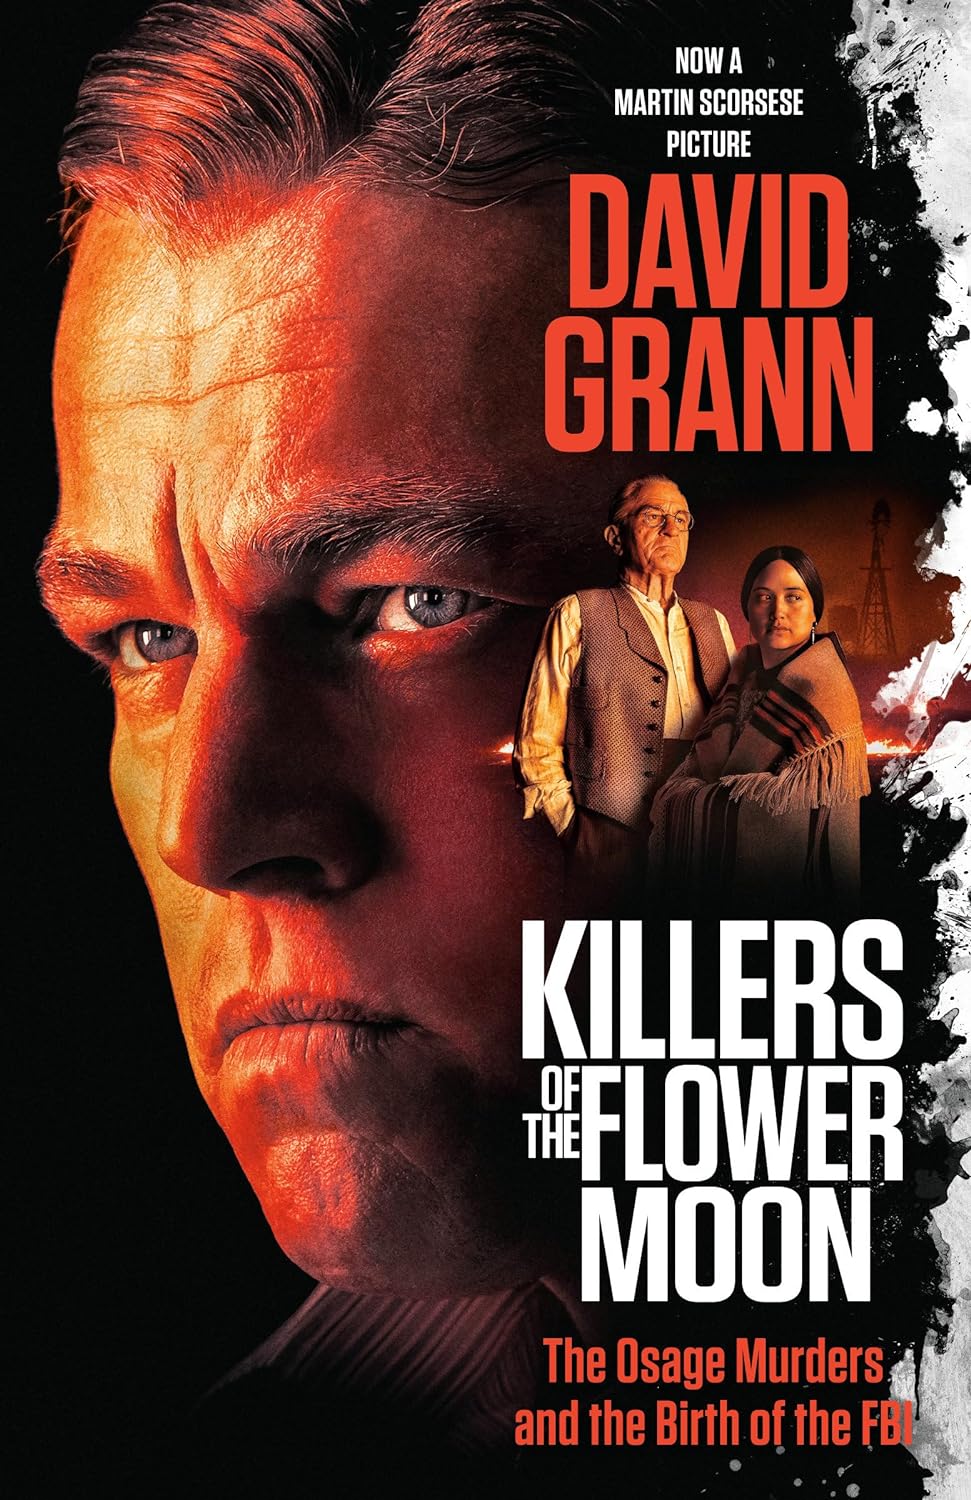 Killers of the Flower Moon (Movie Tie-In Edition) The Osage Murders and the Birth of the FBI - SureShot Books Publishing LLC